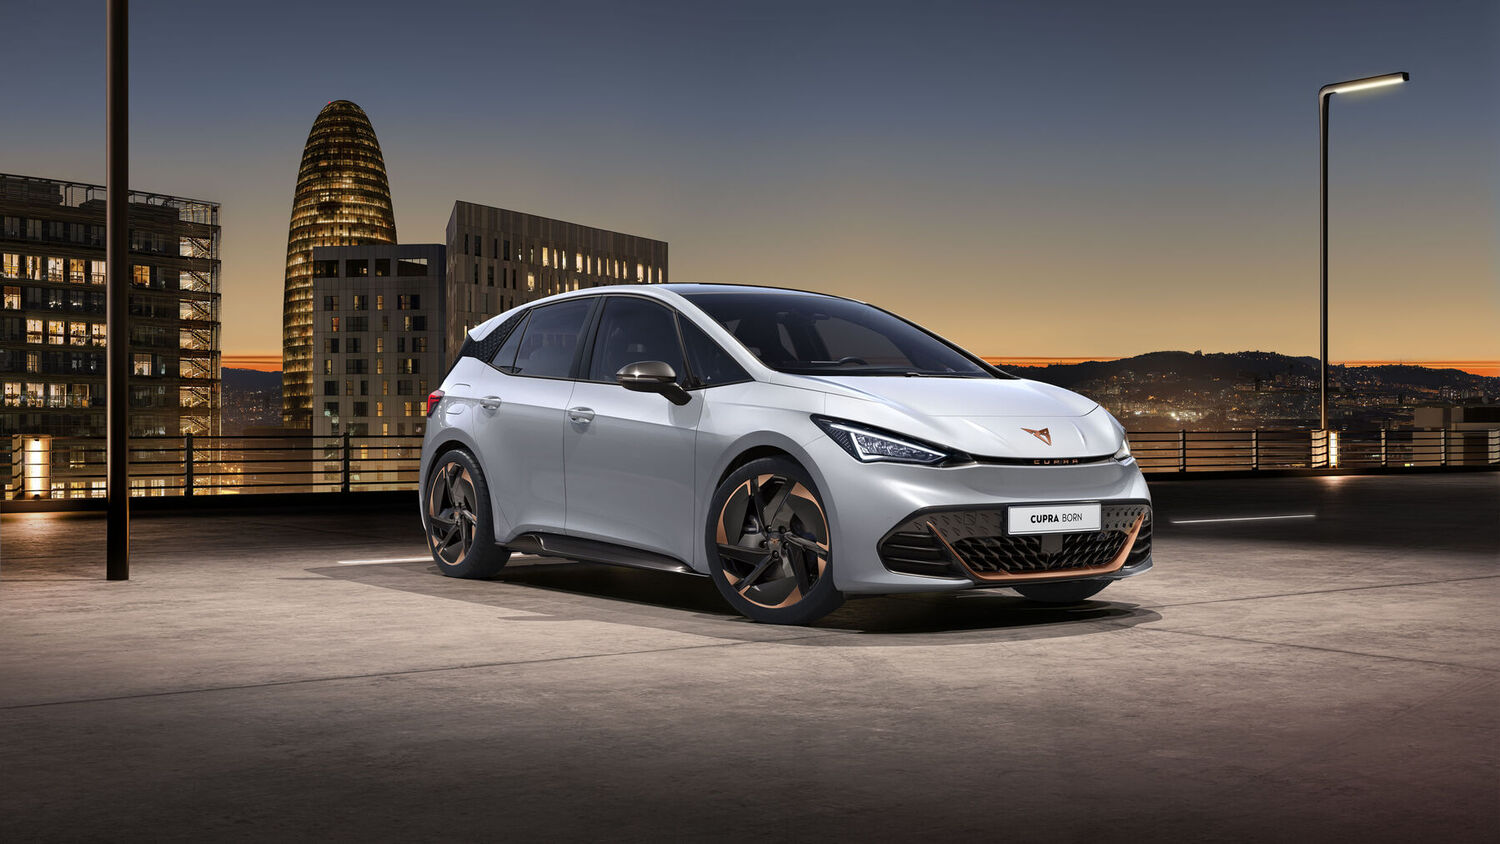 Cupra equips the Born with more power